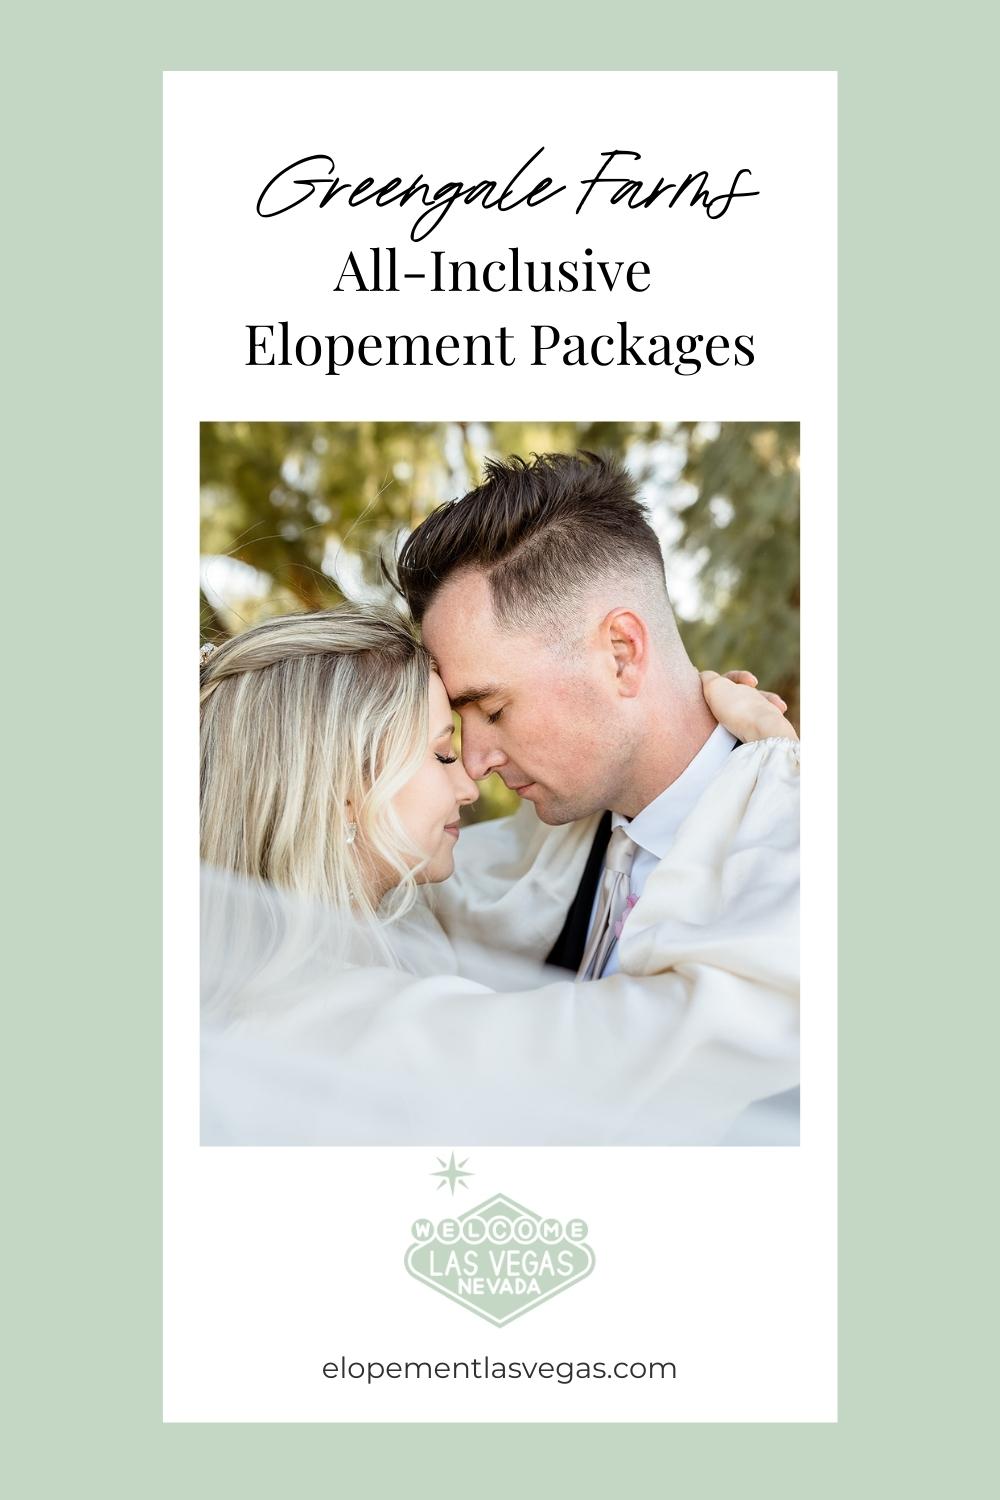 Bride and groom sharing an embrace; image overlaid with text that reads GreenGale Farms All-Inclusive Elopement Packages